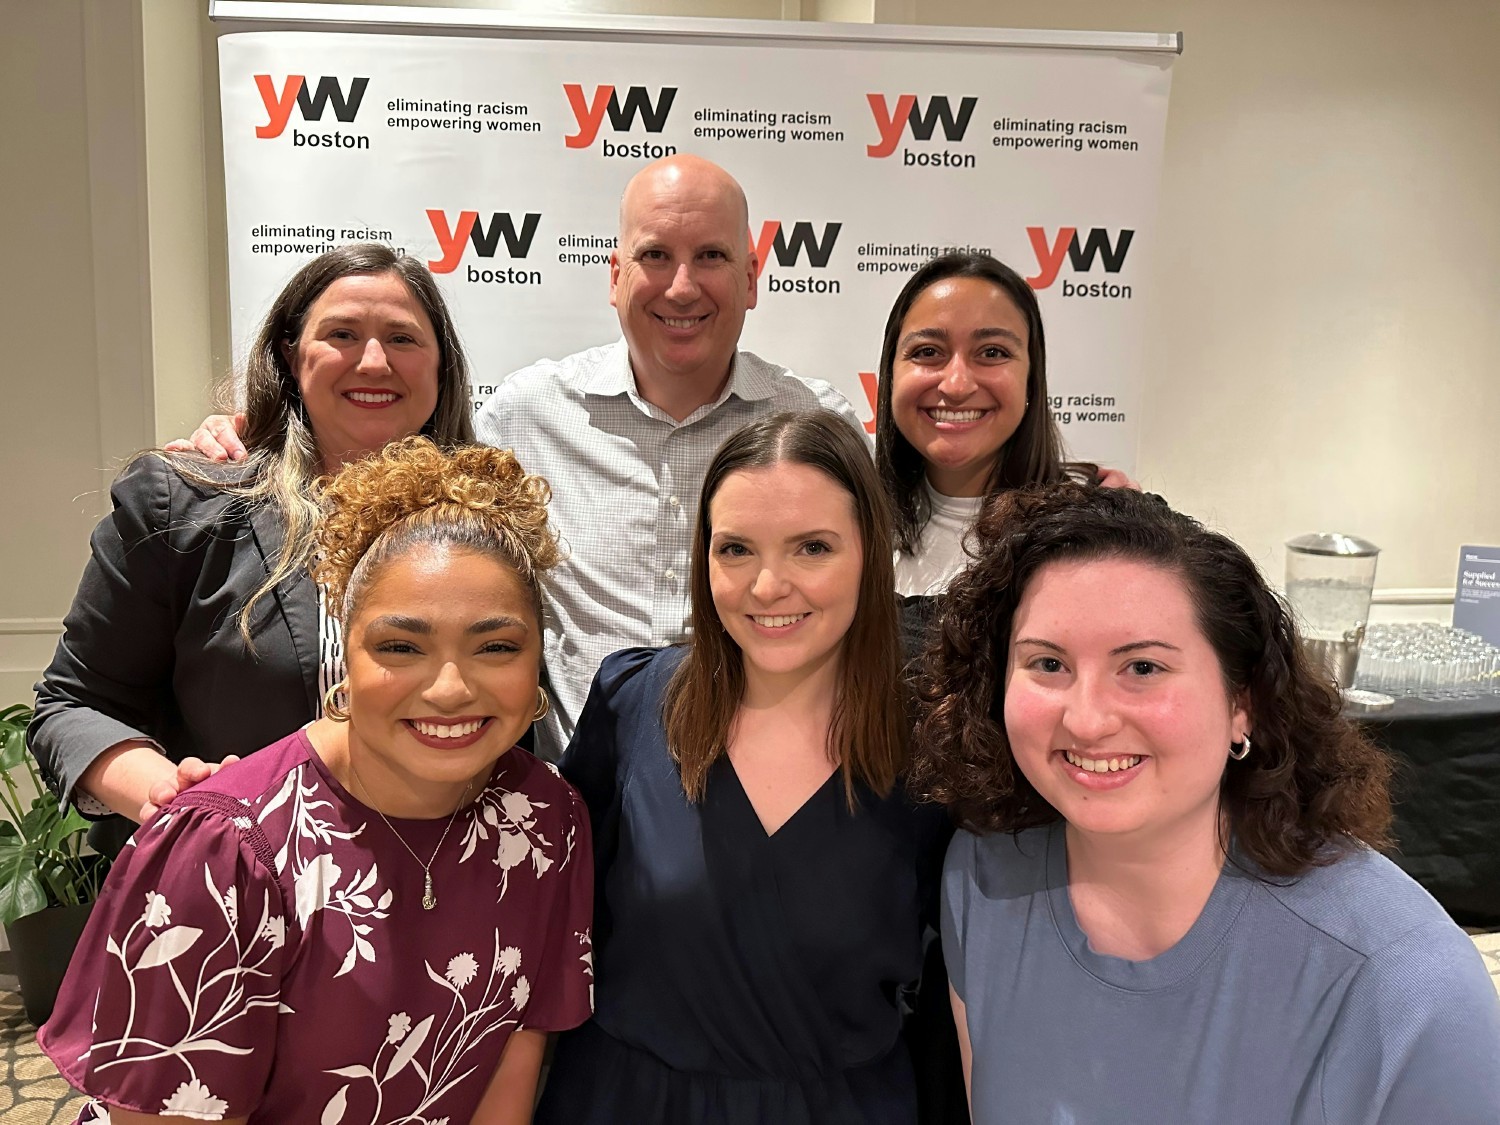 At CMB, we celebrate diversity, support equity, and foster inclusion - these CMBers are supporting YWBoston's commitment